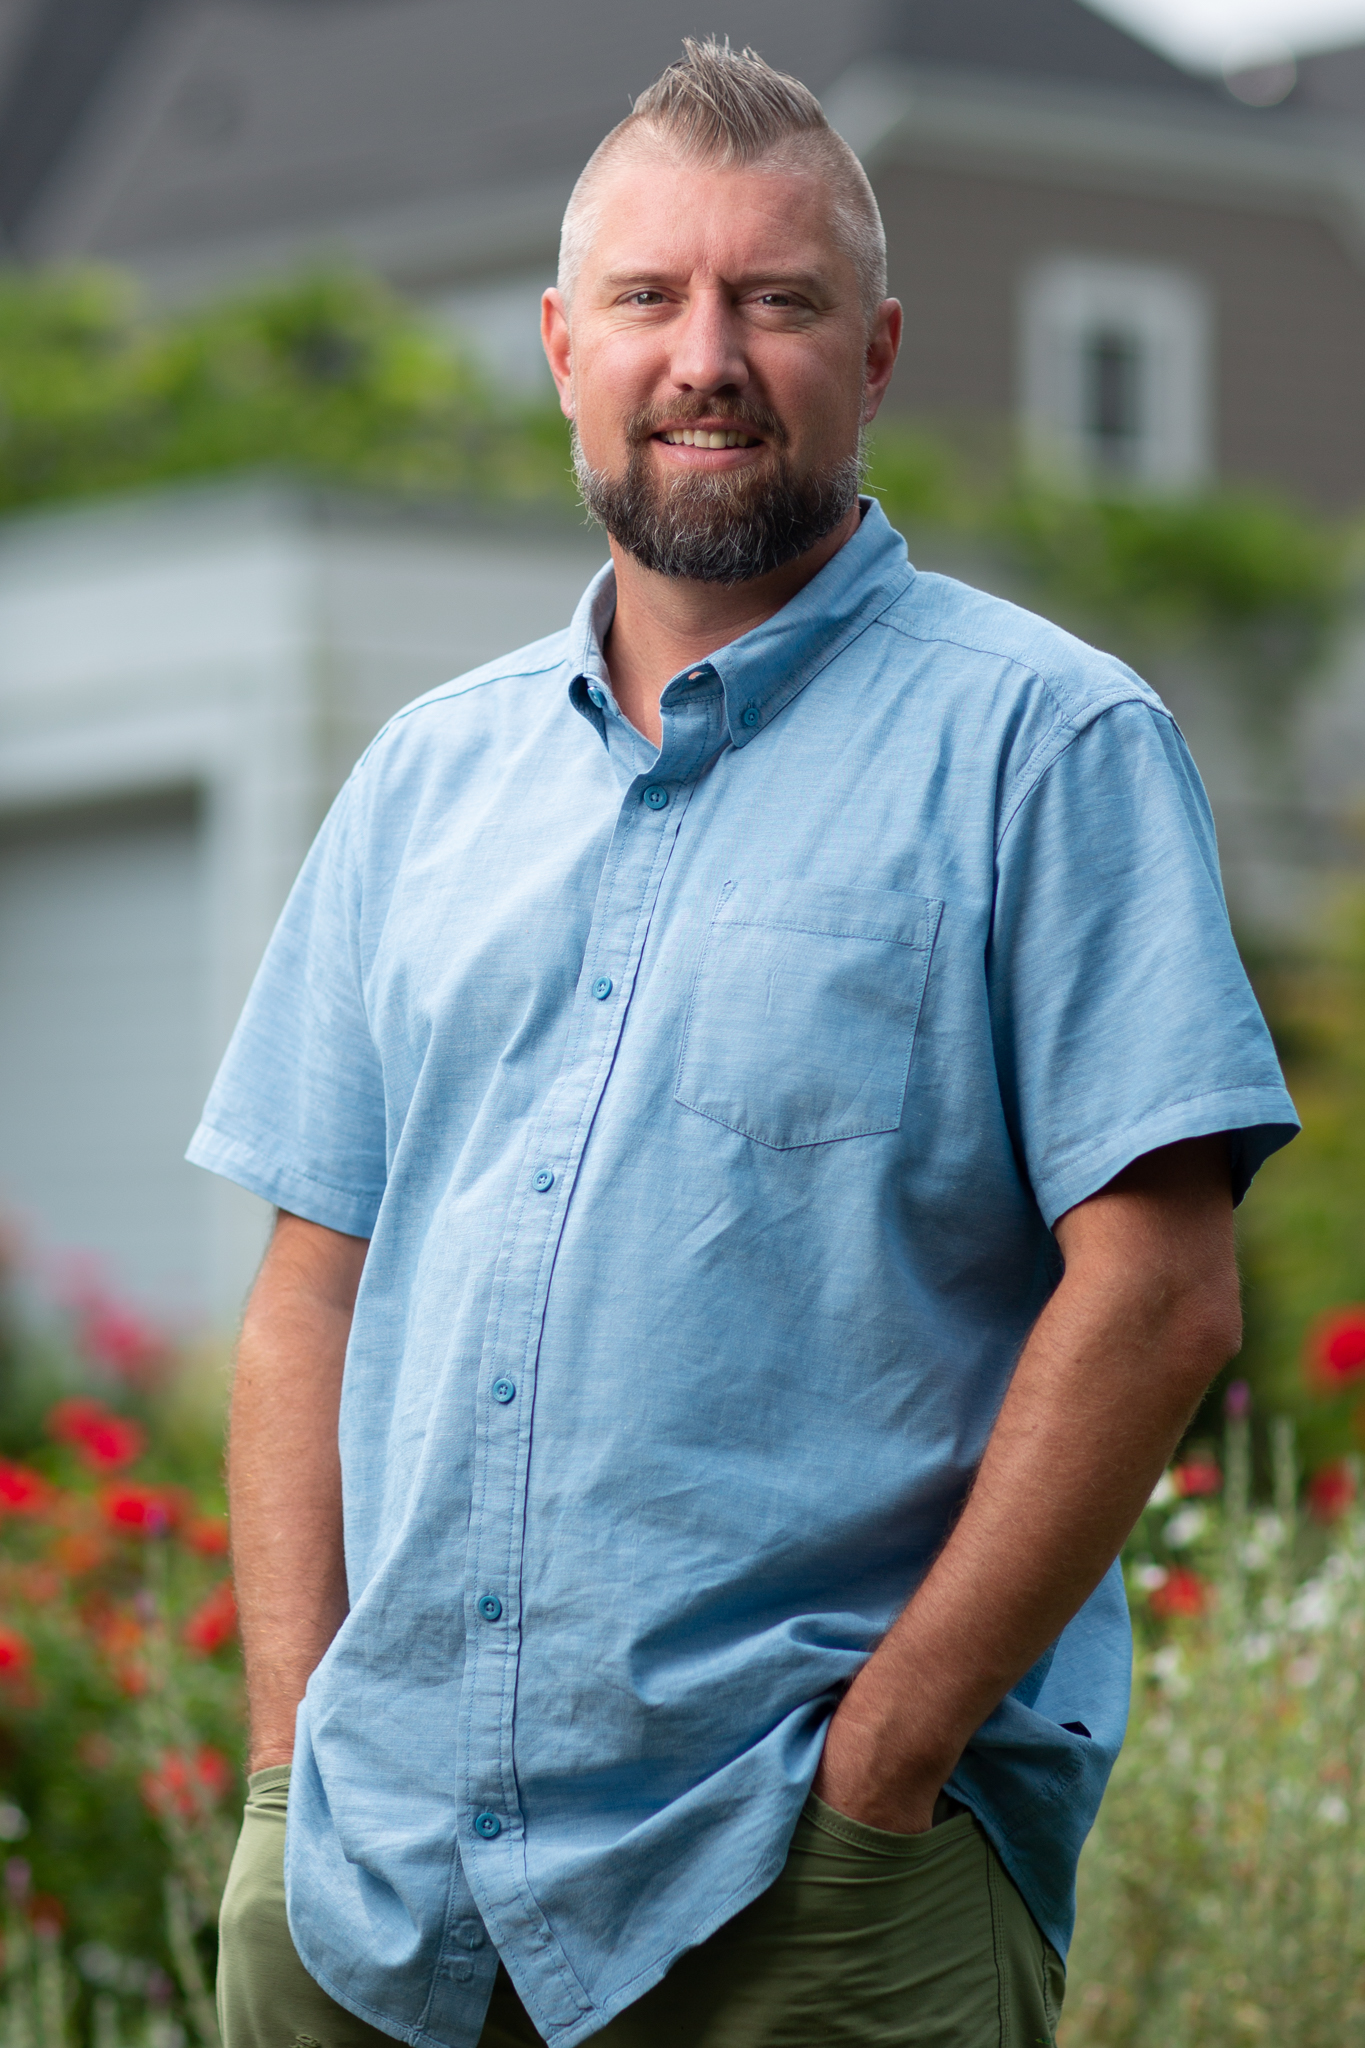 Andrew Trelstad is a family, couples, and children counselor based in Northeast Portland